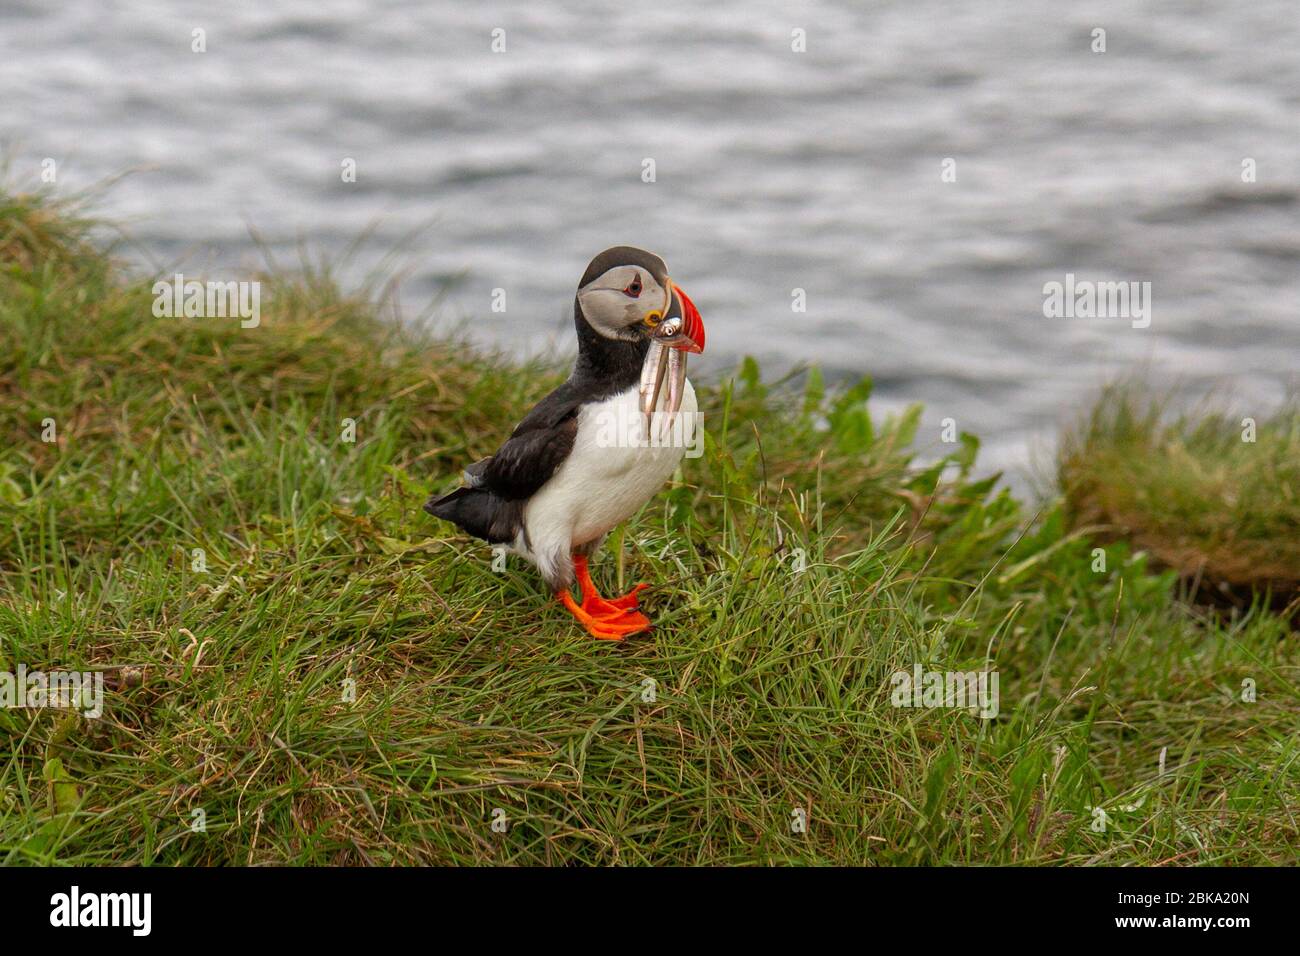 An atlantic puffin (Fratercula arctica) with a recent fish catch in its mouth, Borgarfjarðarhöfn, north east Iceland. Stock Photo